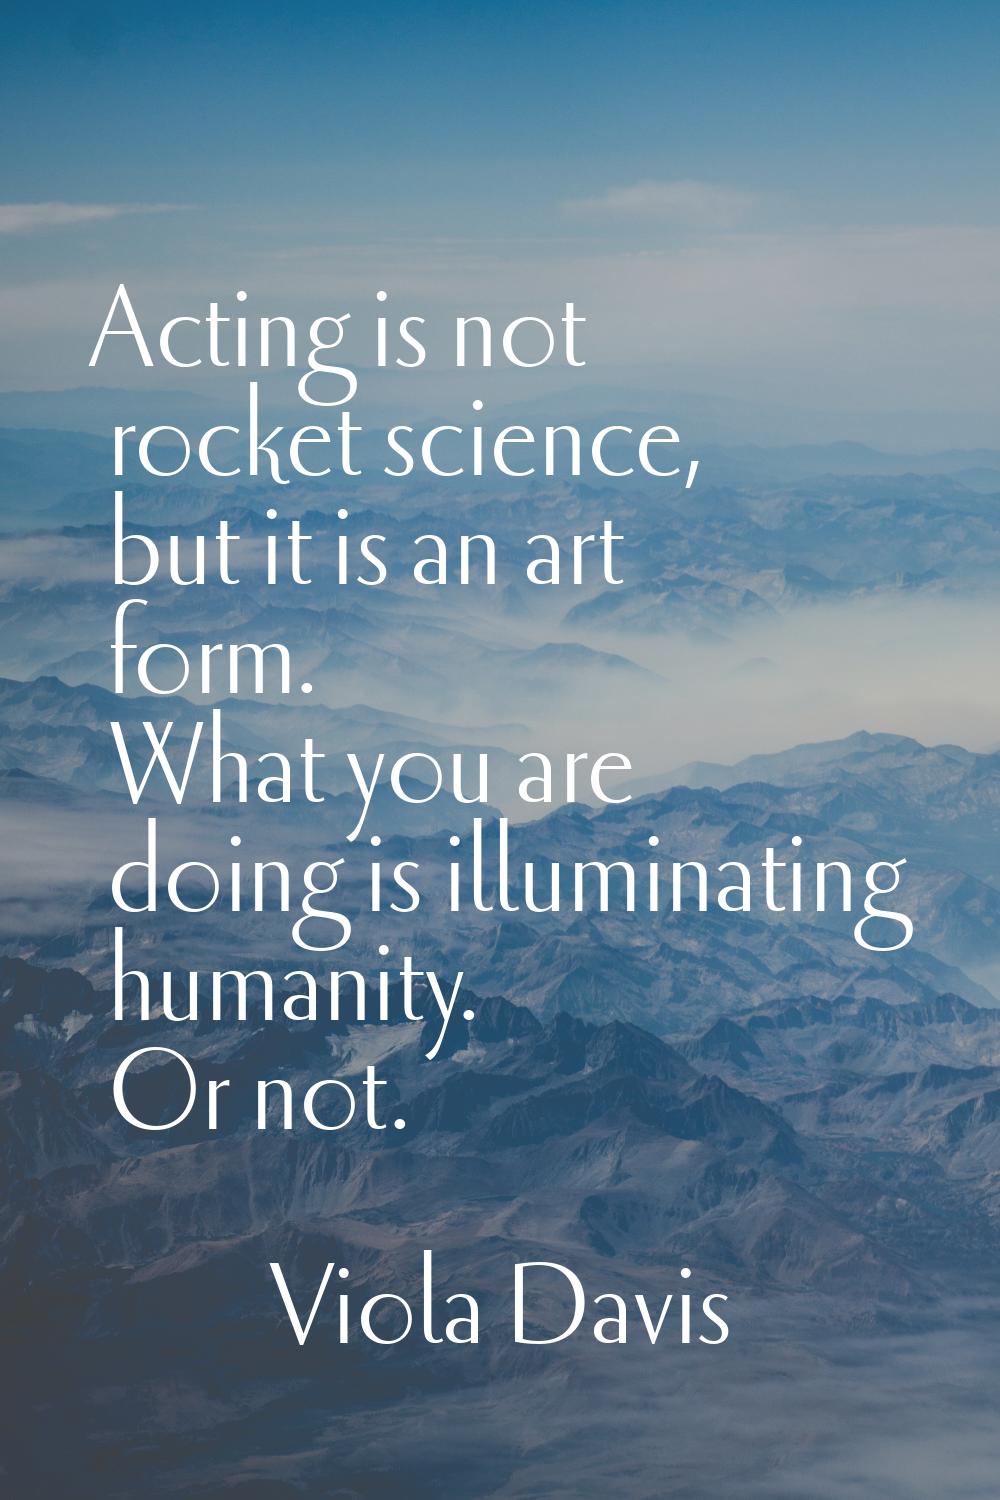 Acting is not rocket science, but it is an art form. What you are doing is illuminating humanity. O